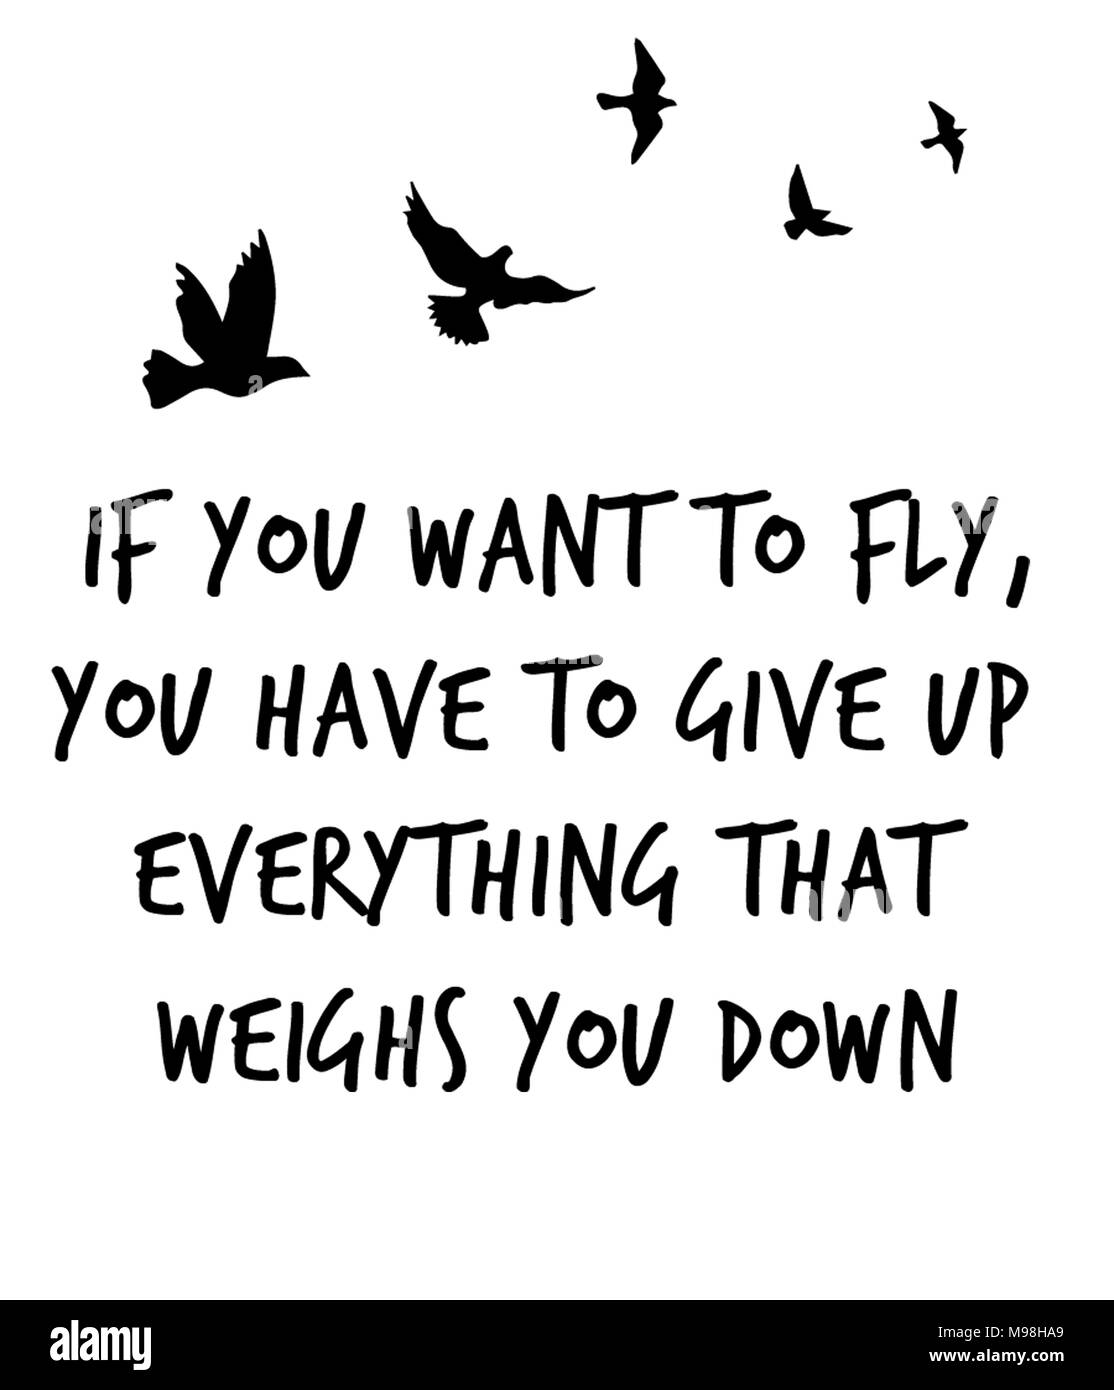 If you want to fly, you have to give up everything that weighs you down Stock Photo